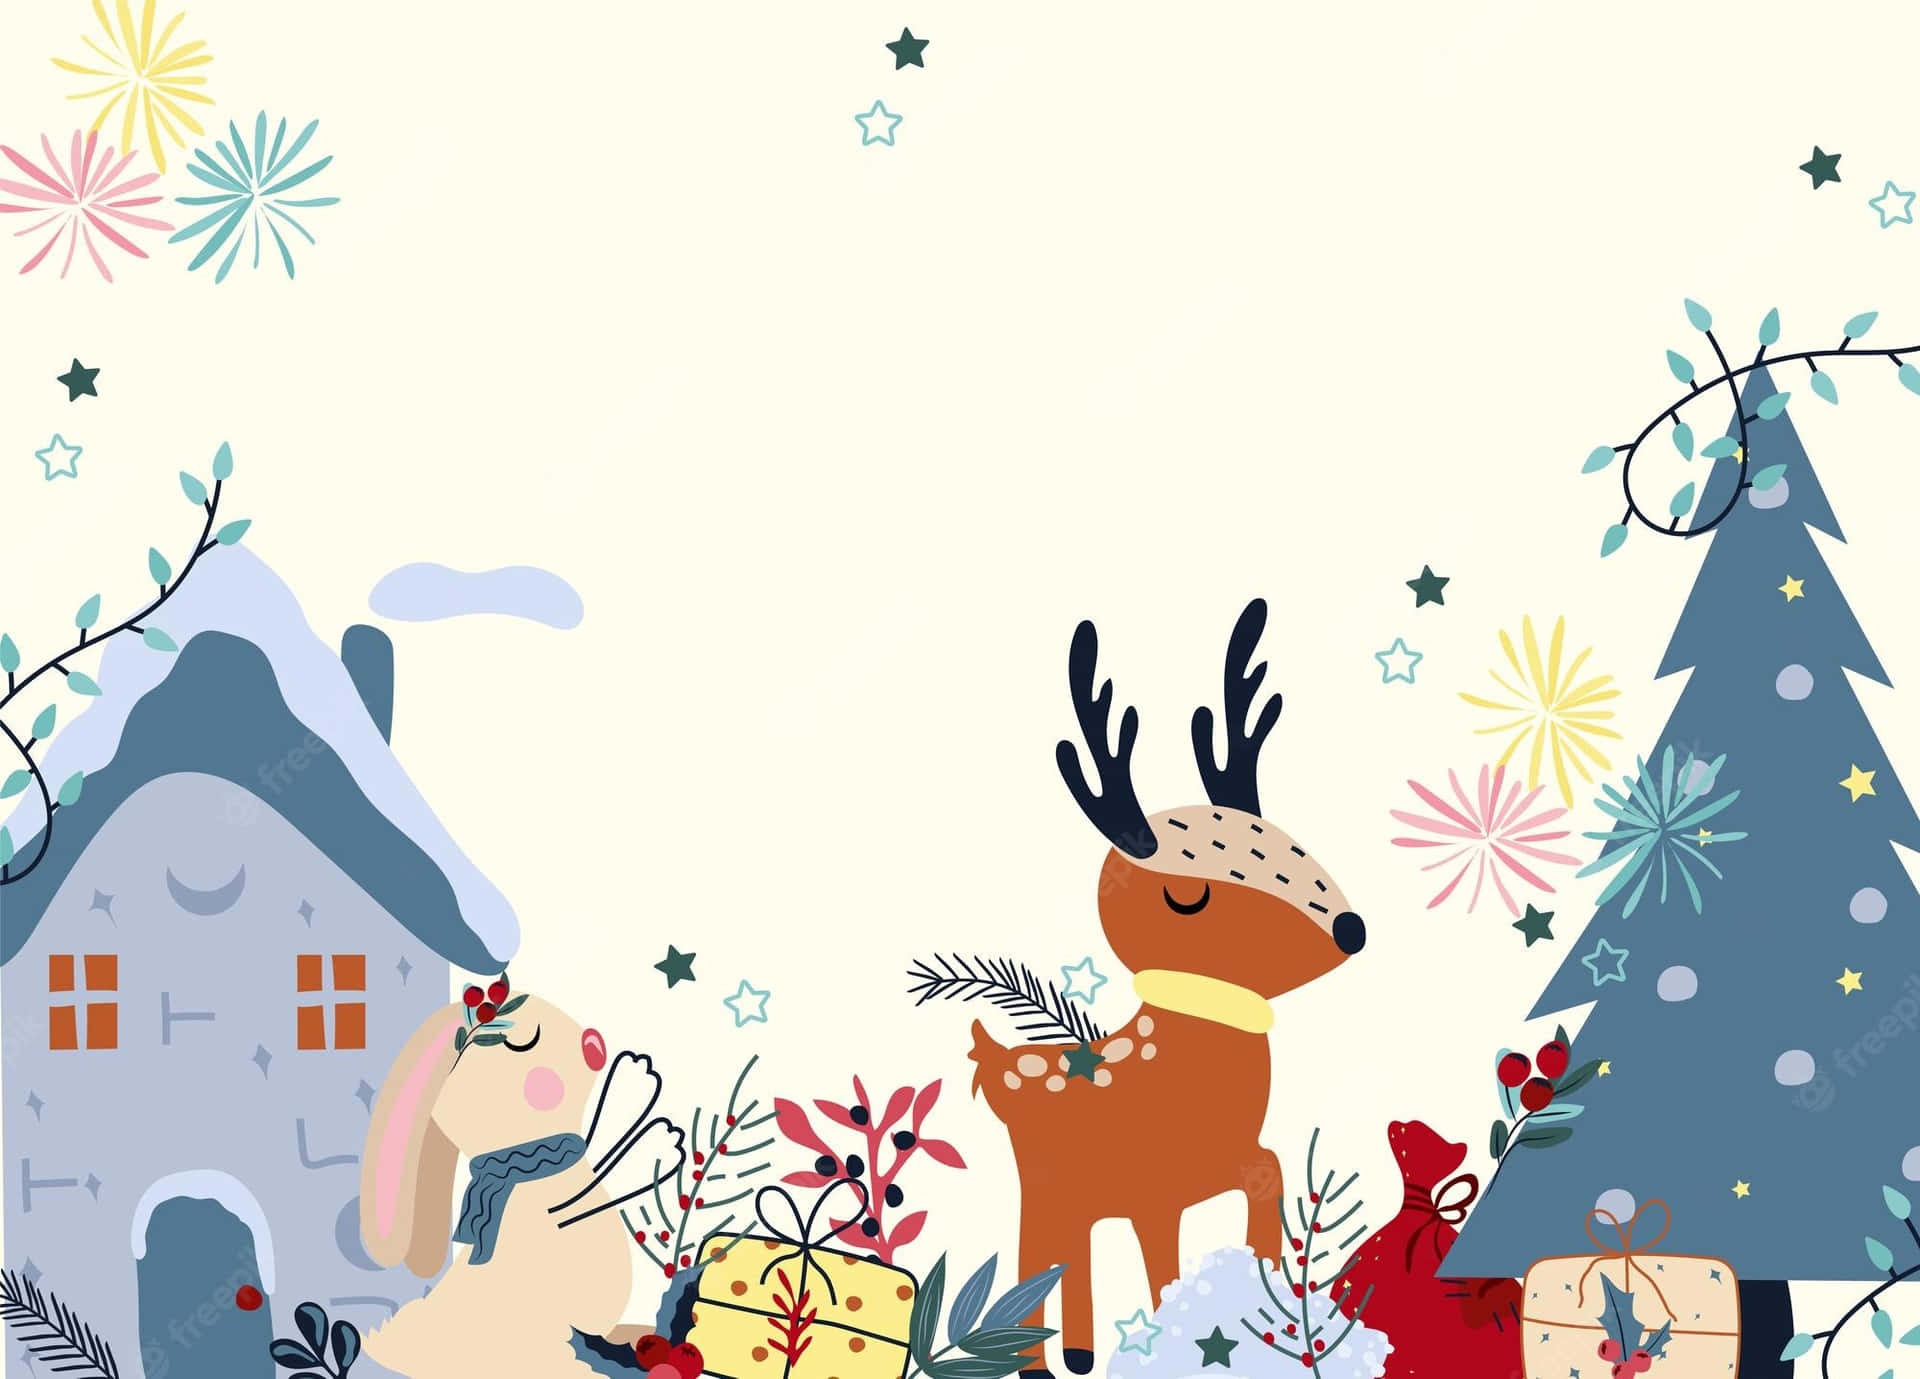 Get into the Festive Spirit with this Funny Holiday Desktop Wallpaper Wallpaper